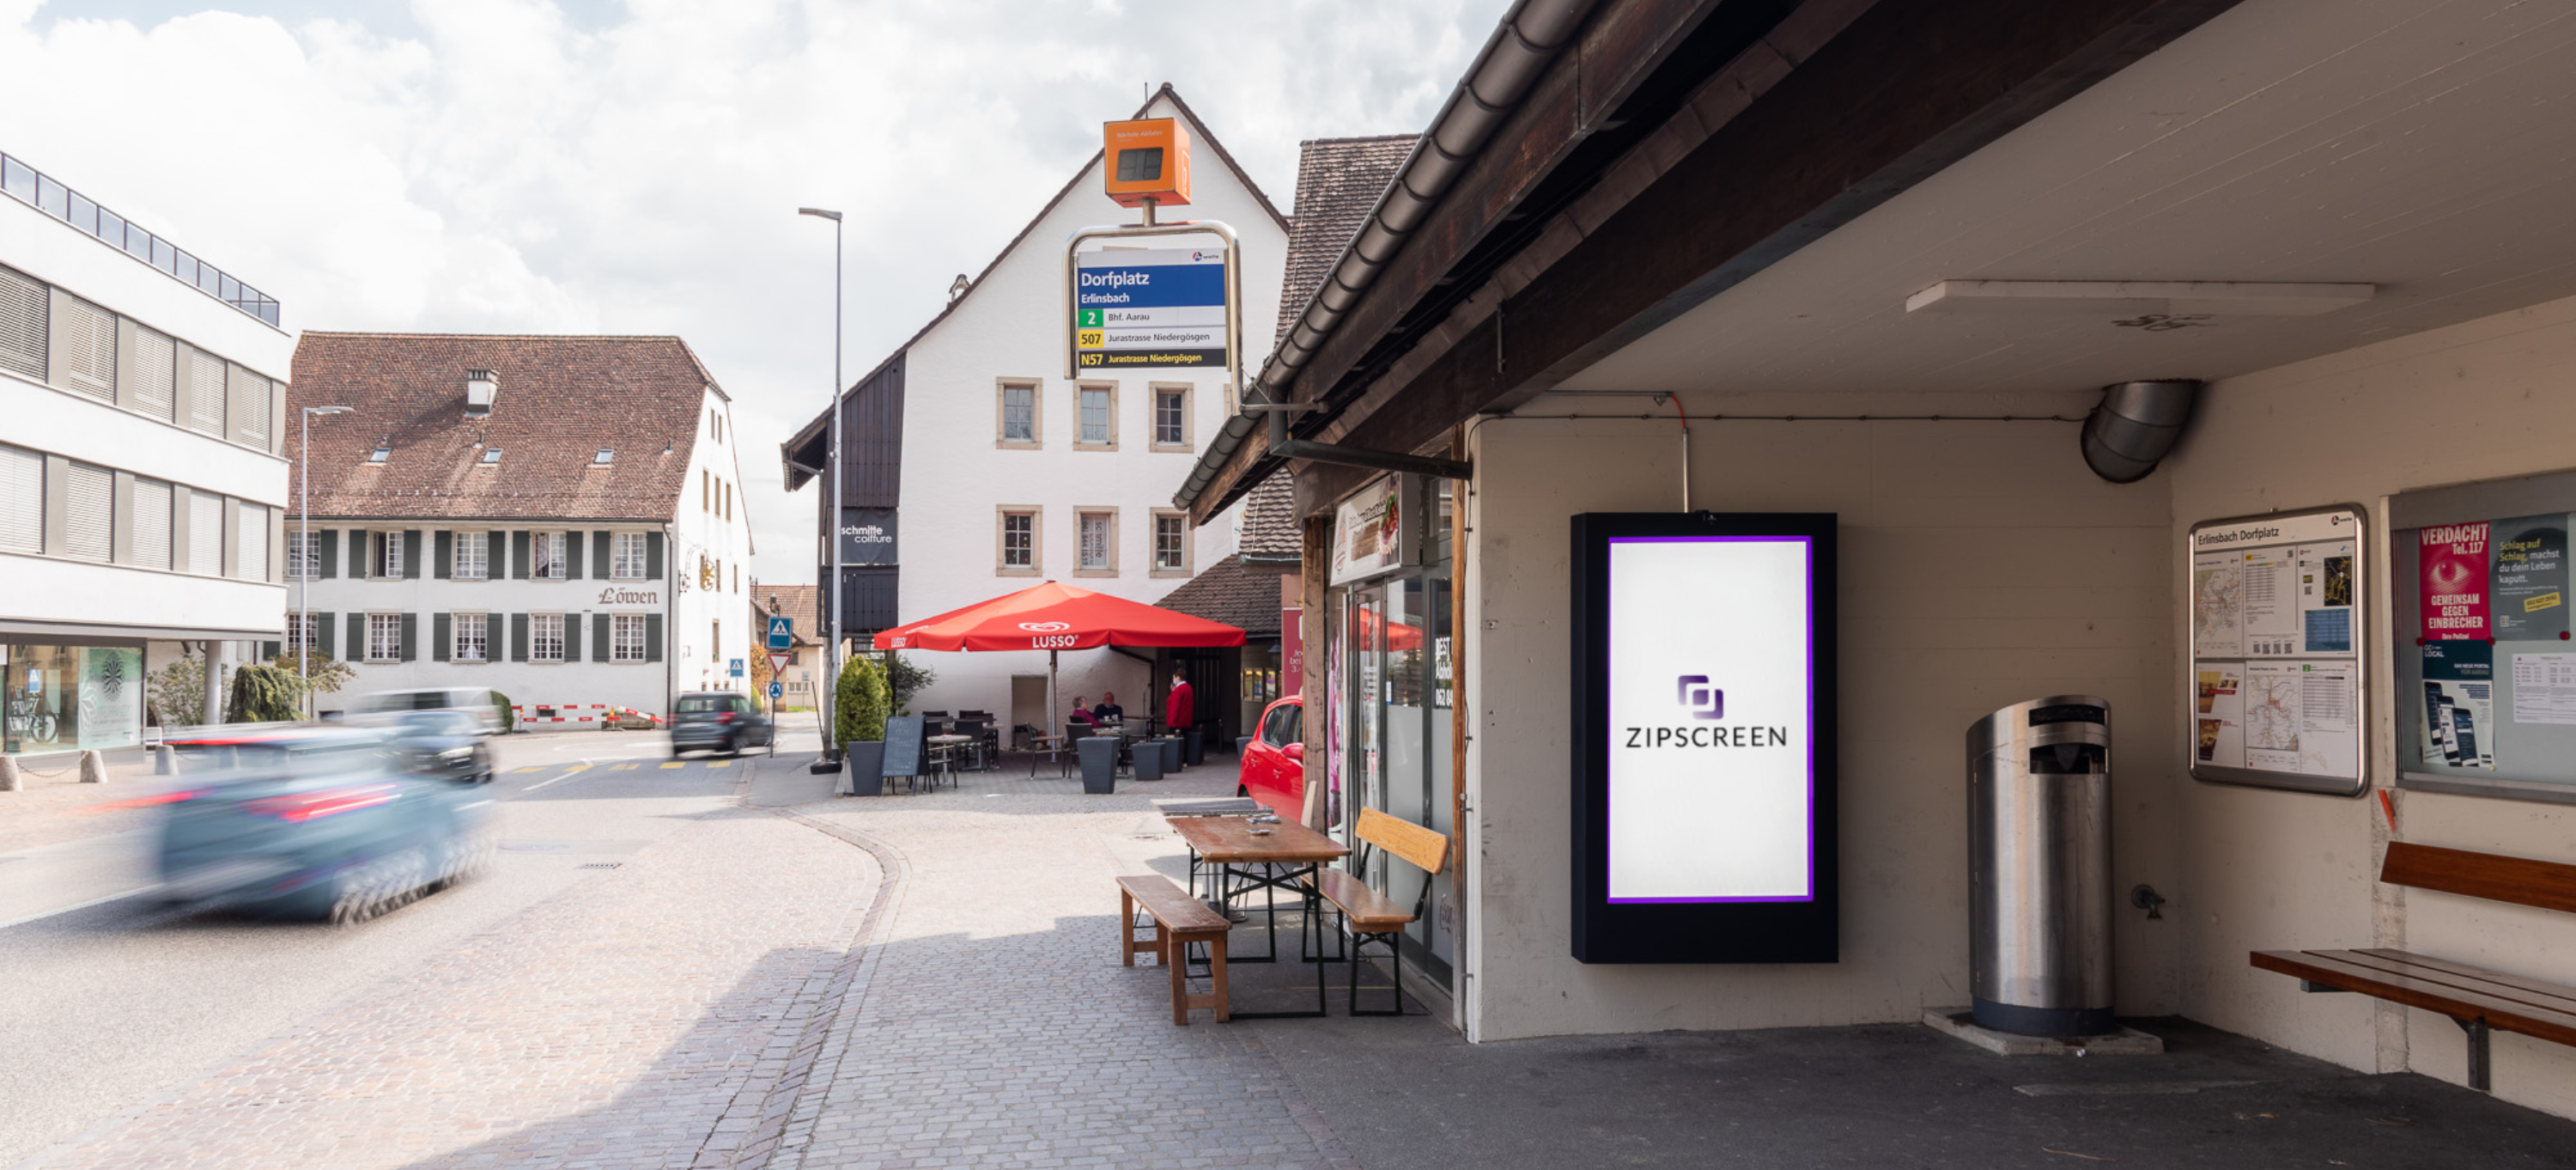 ZipScreen in Erlinsbach, Solothurn